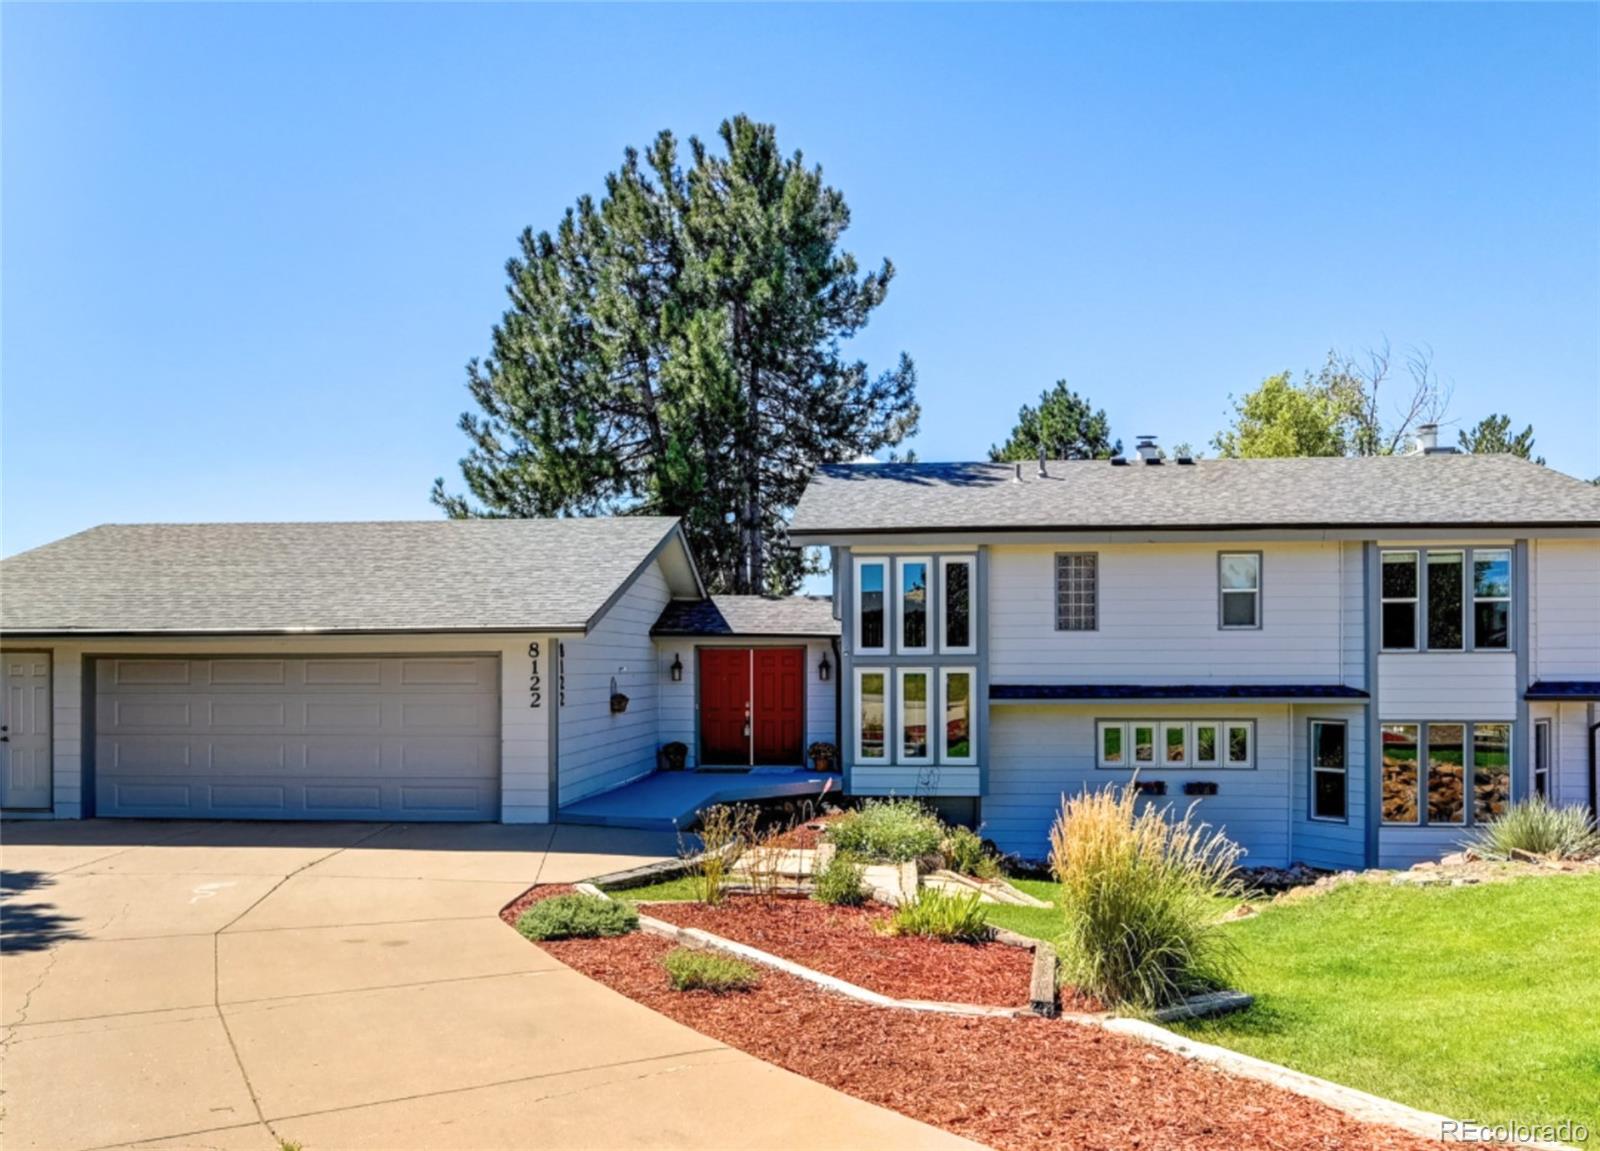 8122  Lakeview Drive, parker MLS: 5798164 Beds: 5 Baths: 3 Price: $899,000